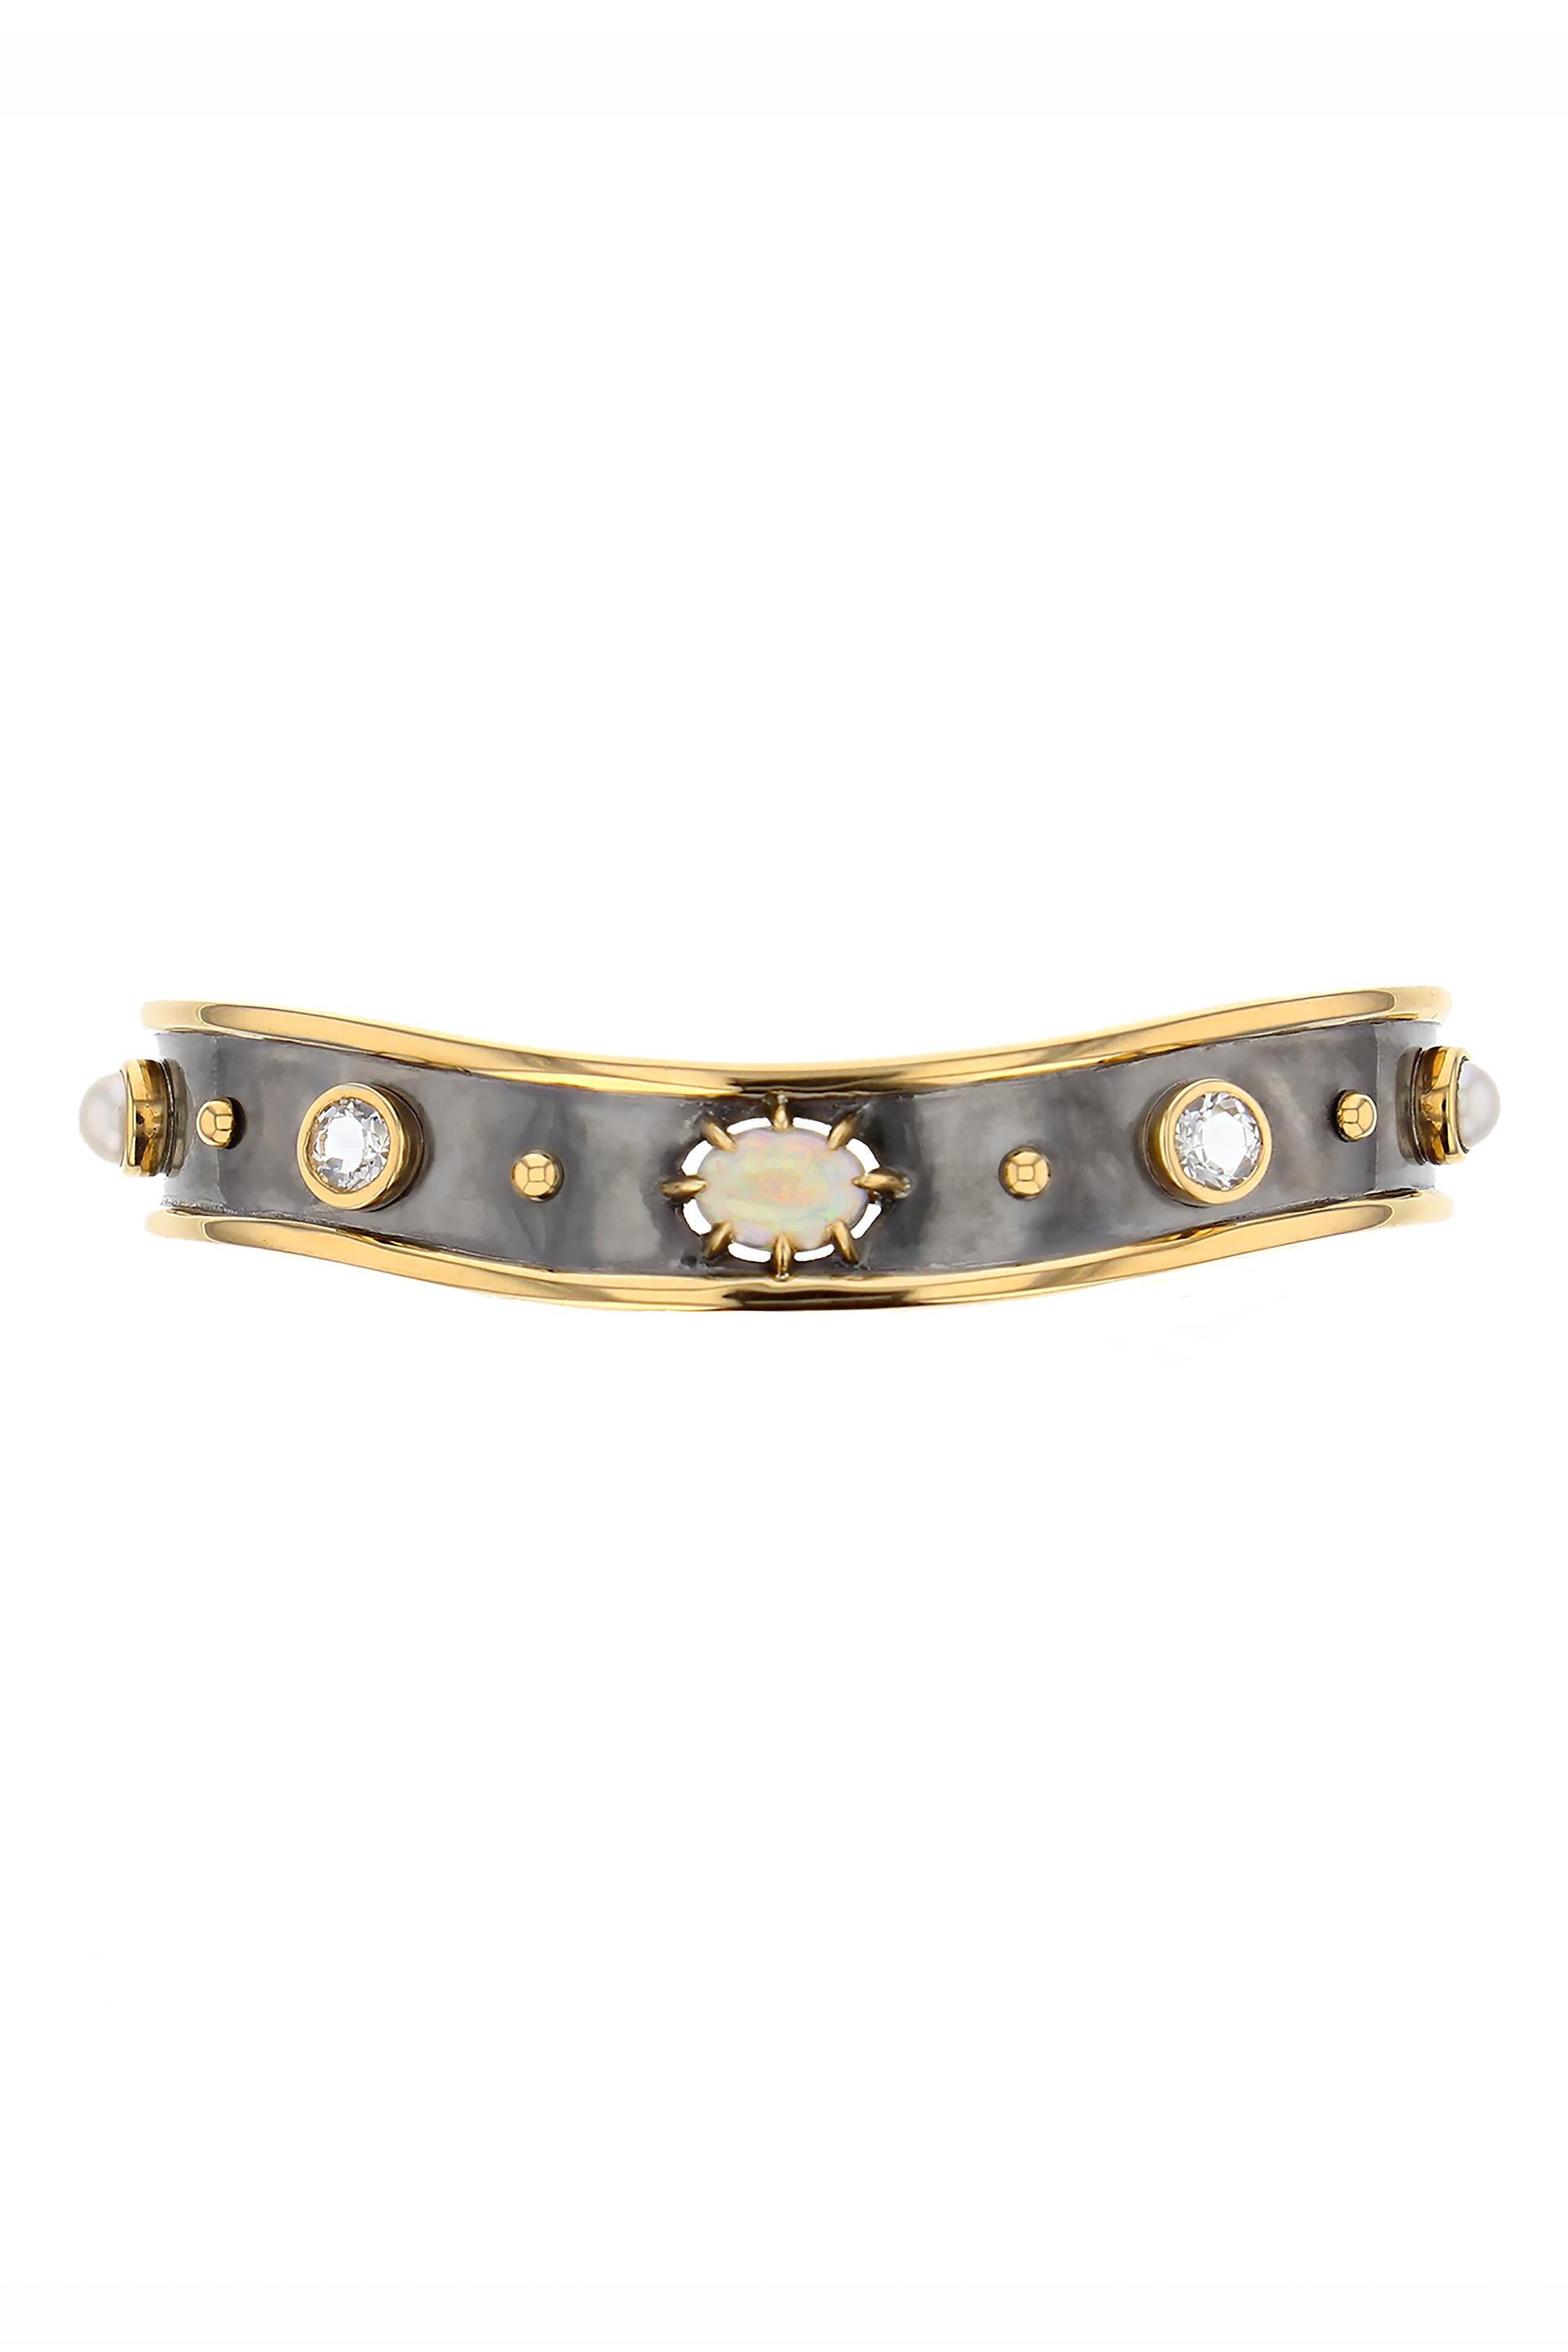 Opal, Sapphire and Akoya Pearls Bandeau Bracelet in 18k Yellow Gold by Elie Top For Sale